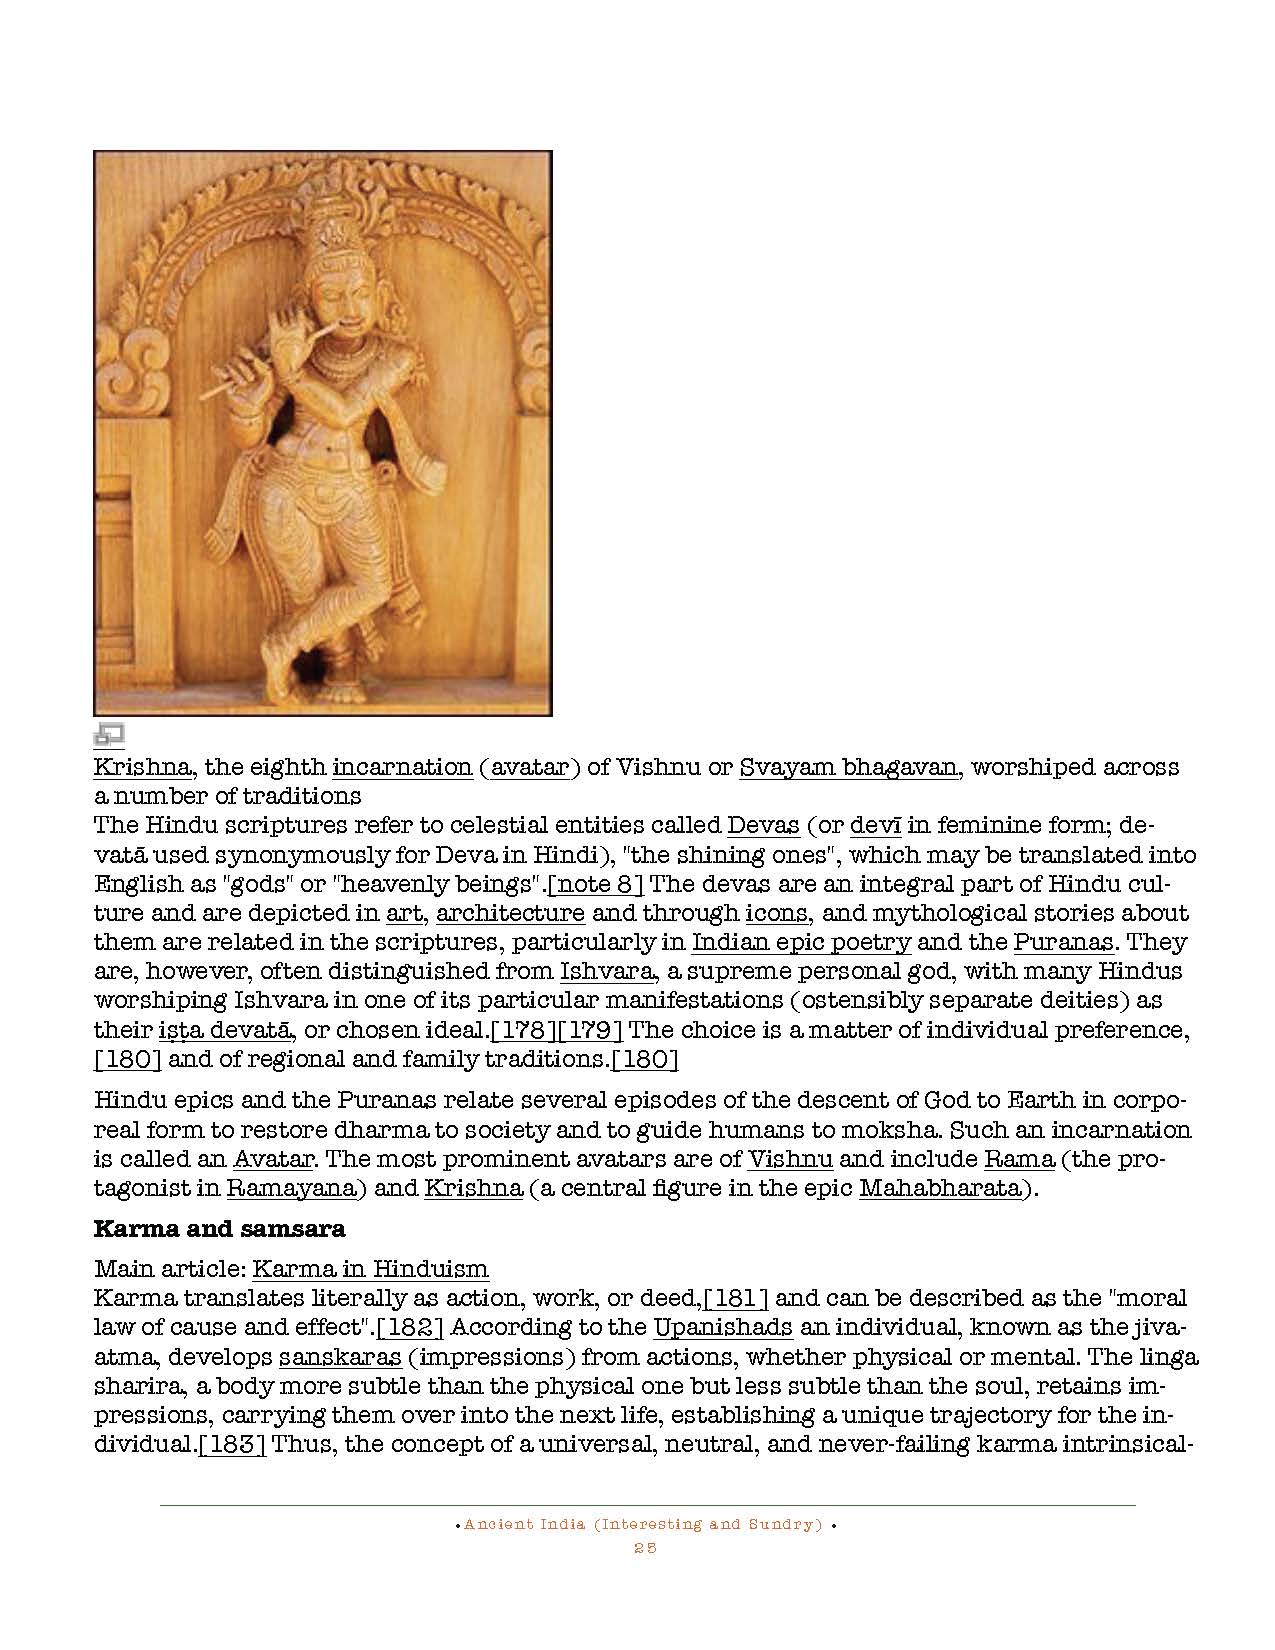 HOCE- Ancient India Notes (Other Interesting and Sundry)_Page_025.jpg